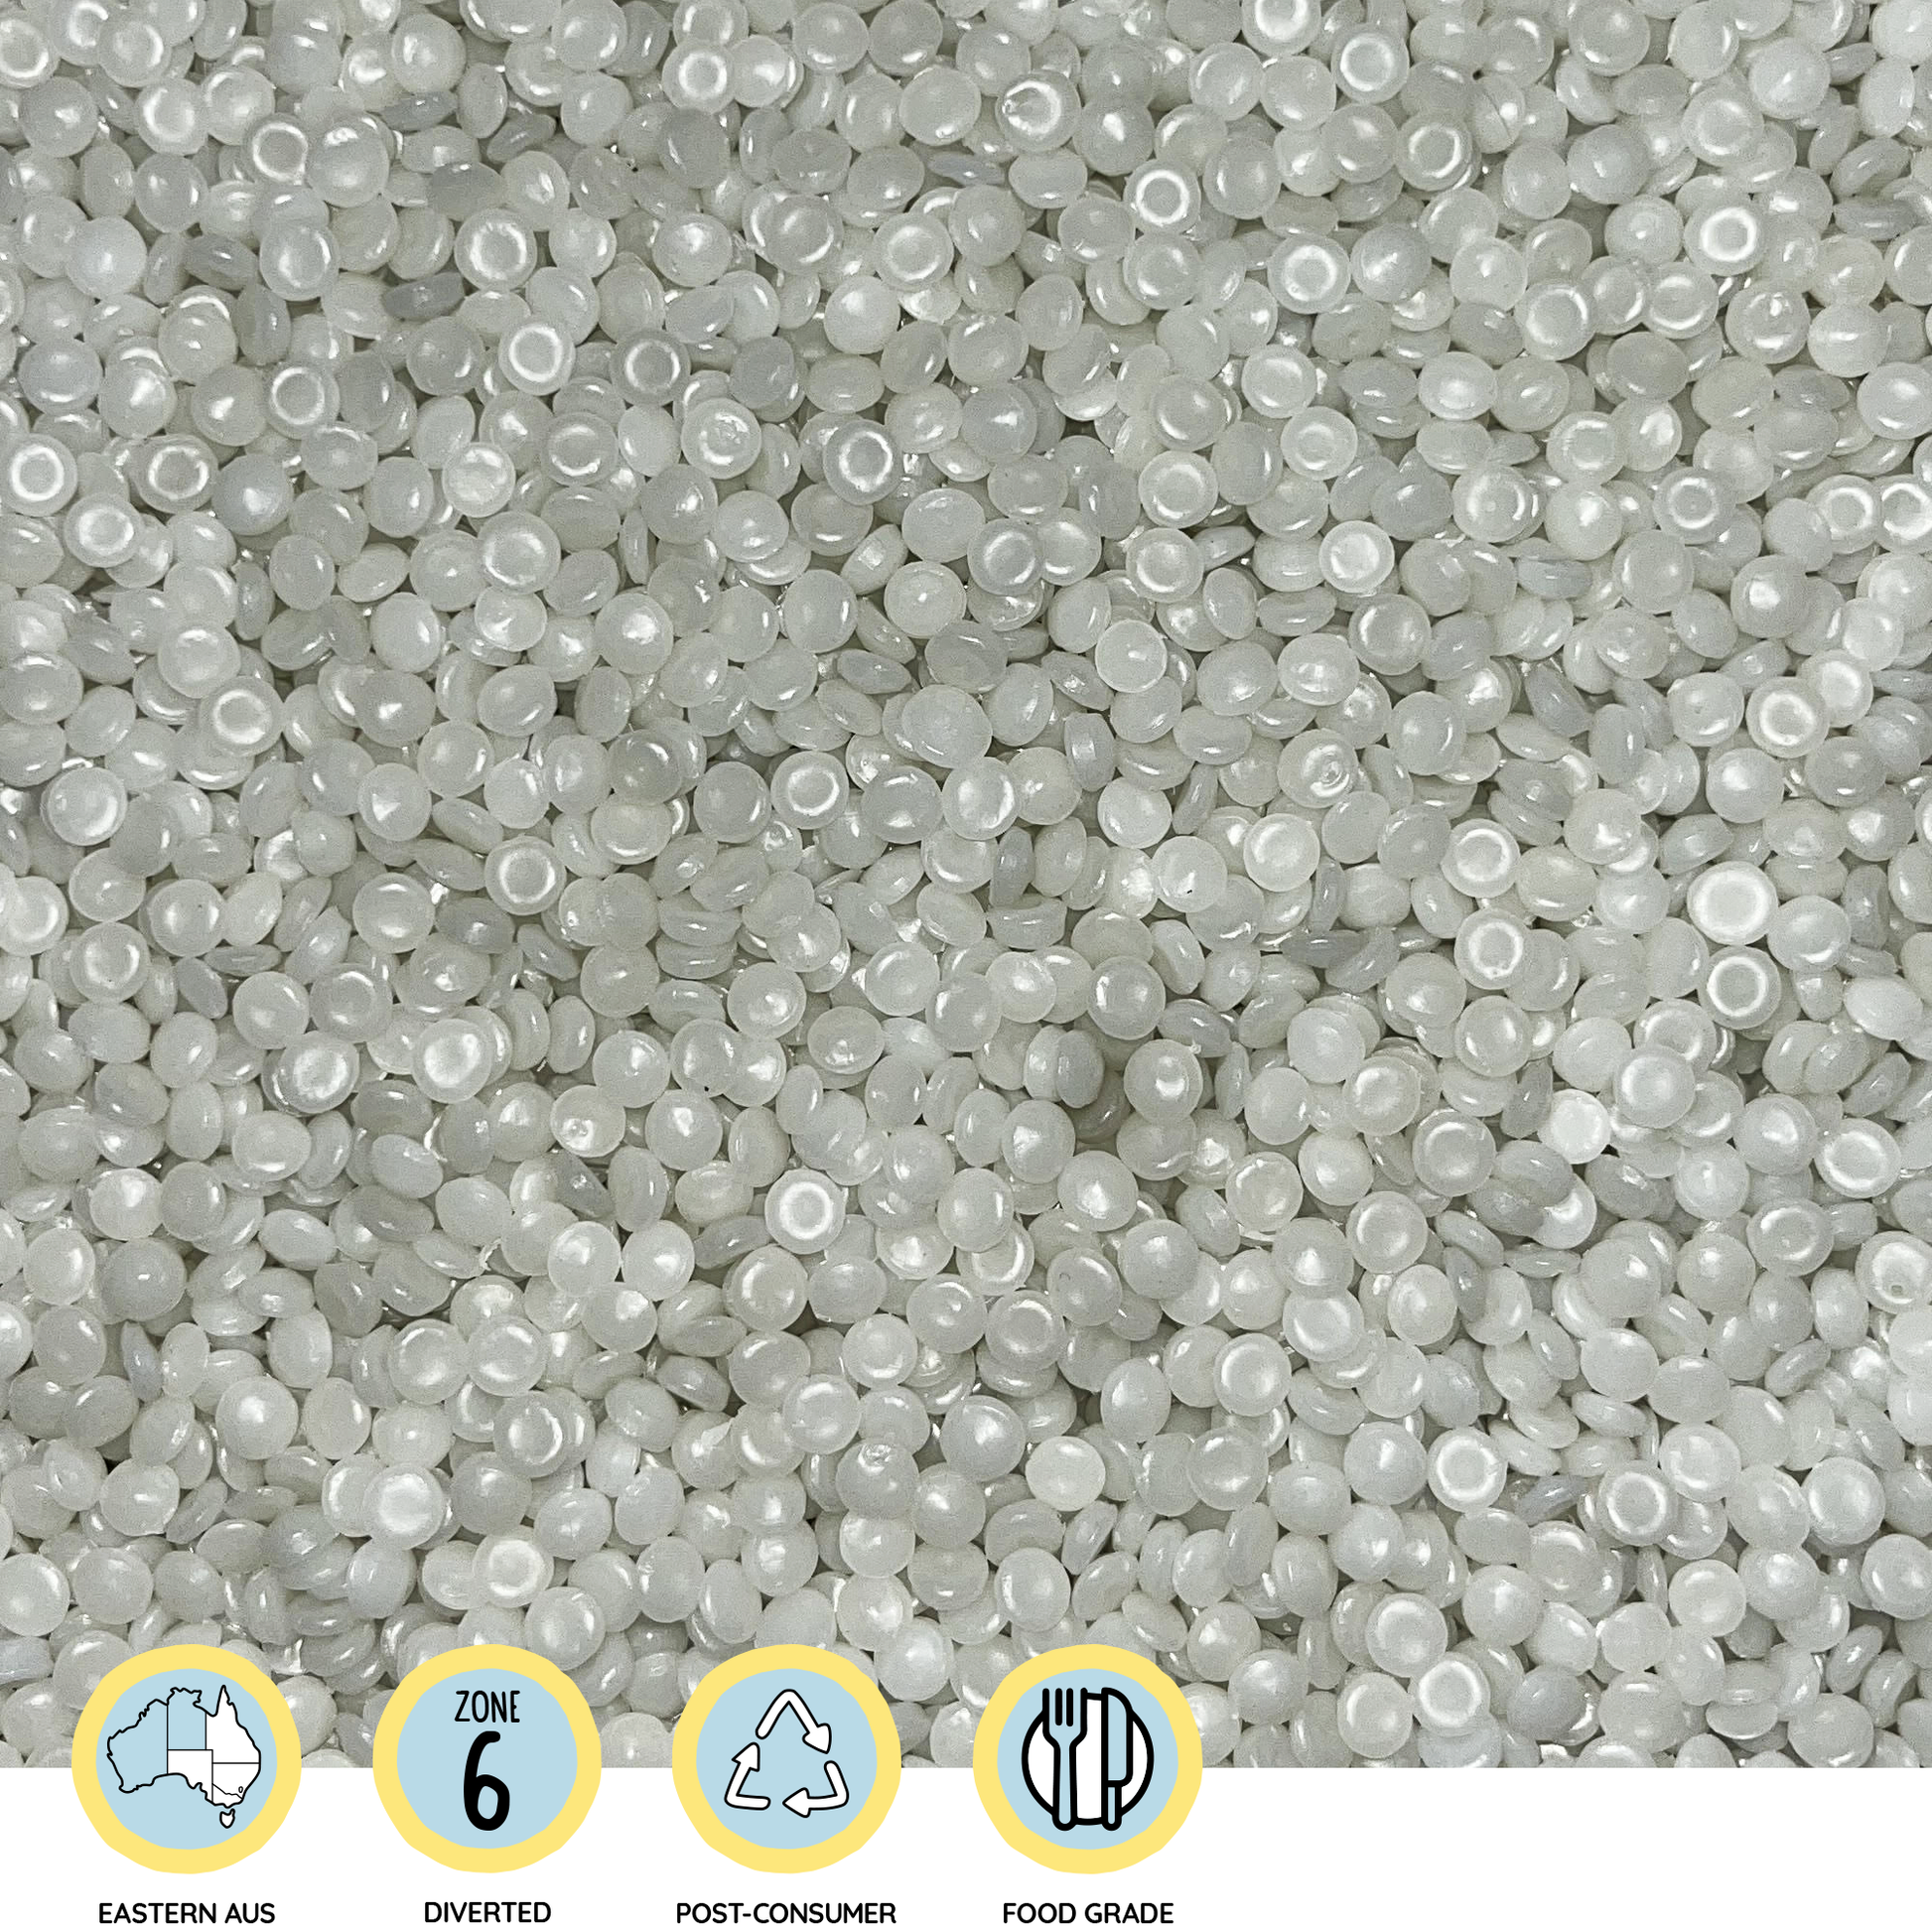 Food grade / contact safe recycled plastic pellets | HDPE post-consumer resin